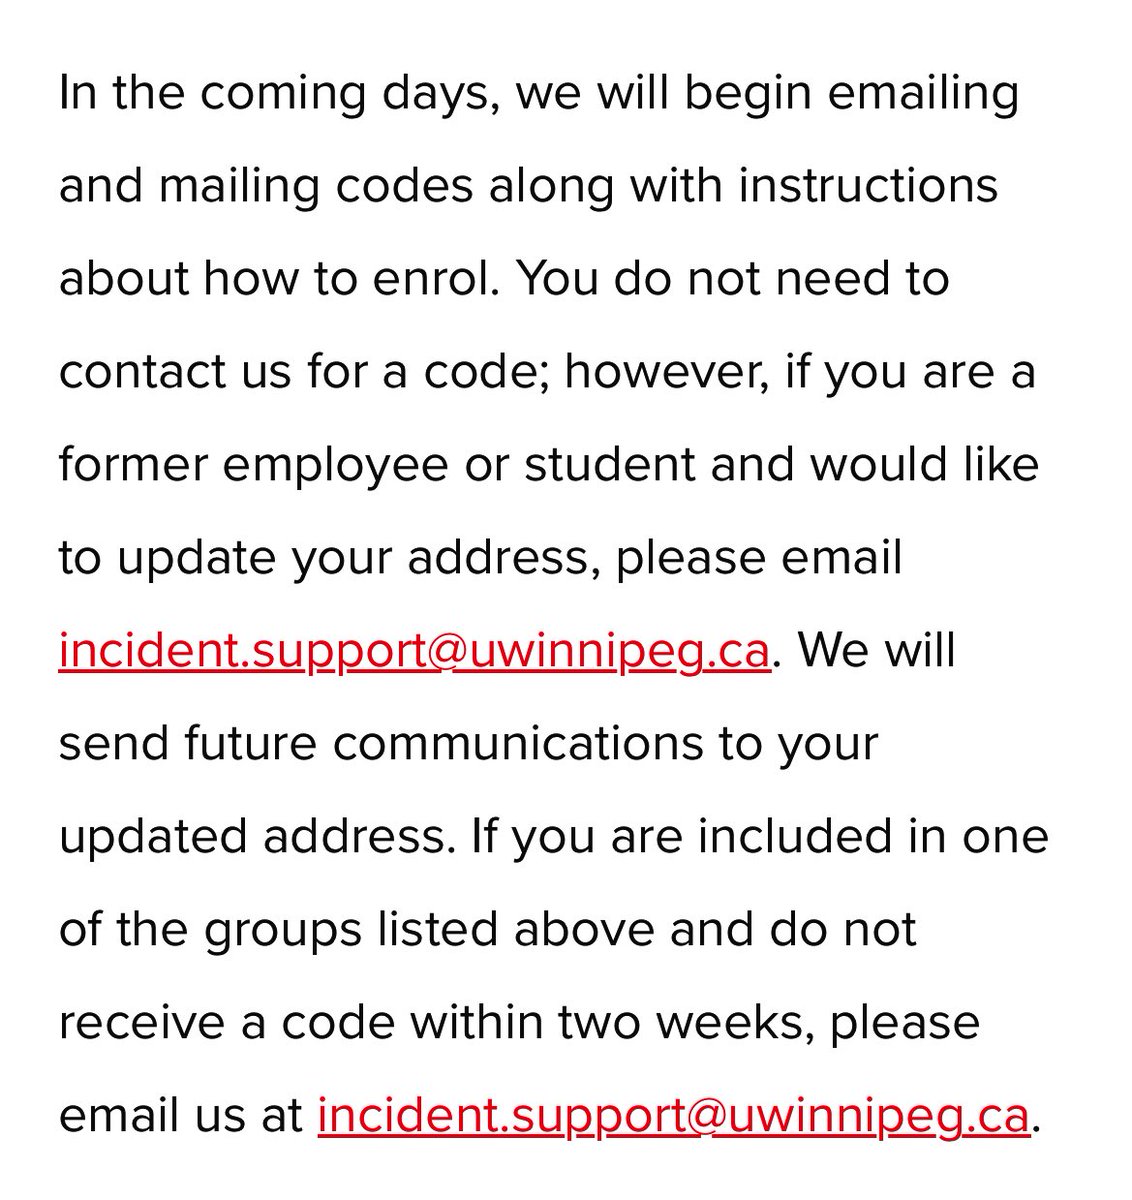 Look I know that everyone at the @uwinnipeg is doing their best right now, but forgive me if I’m feeling hesitant about emailing them my current address to add to their database right now…